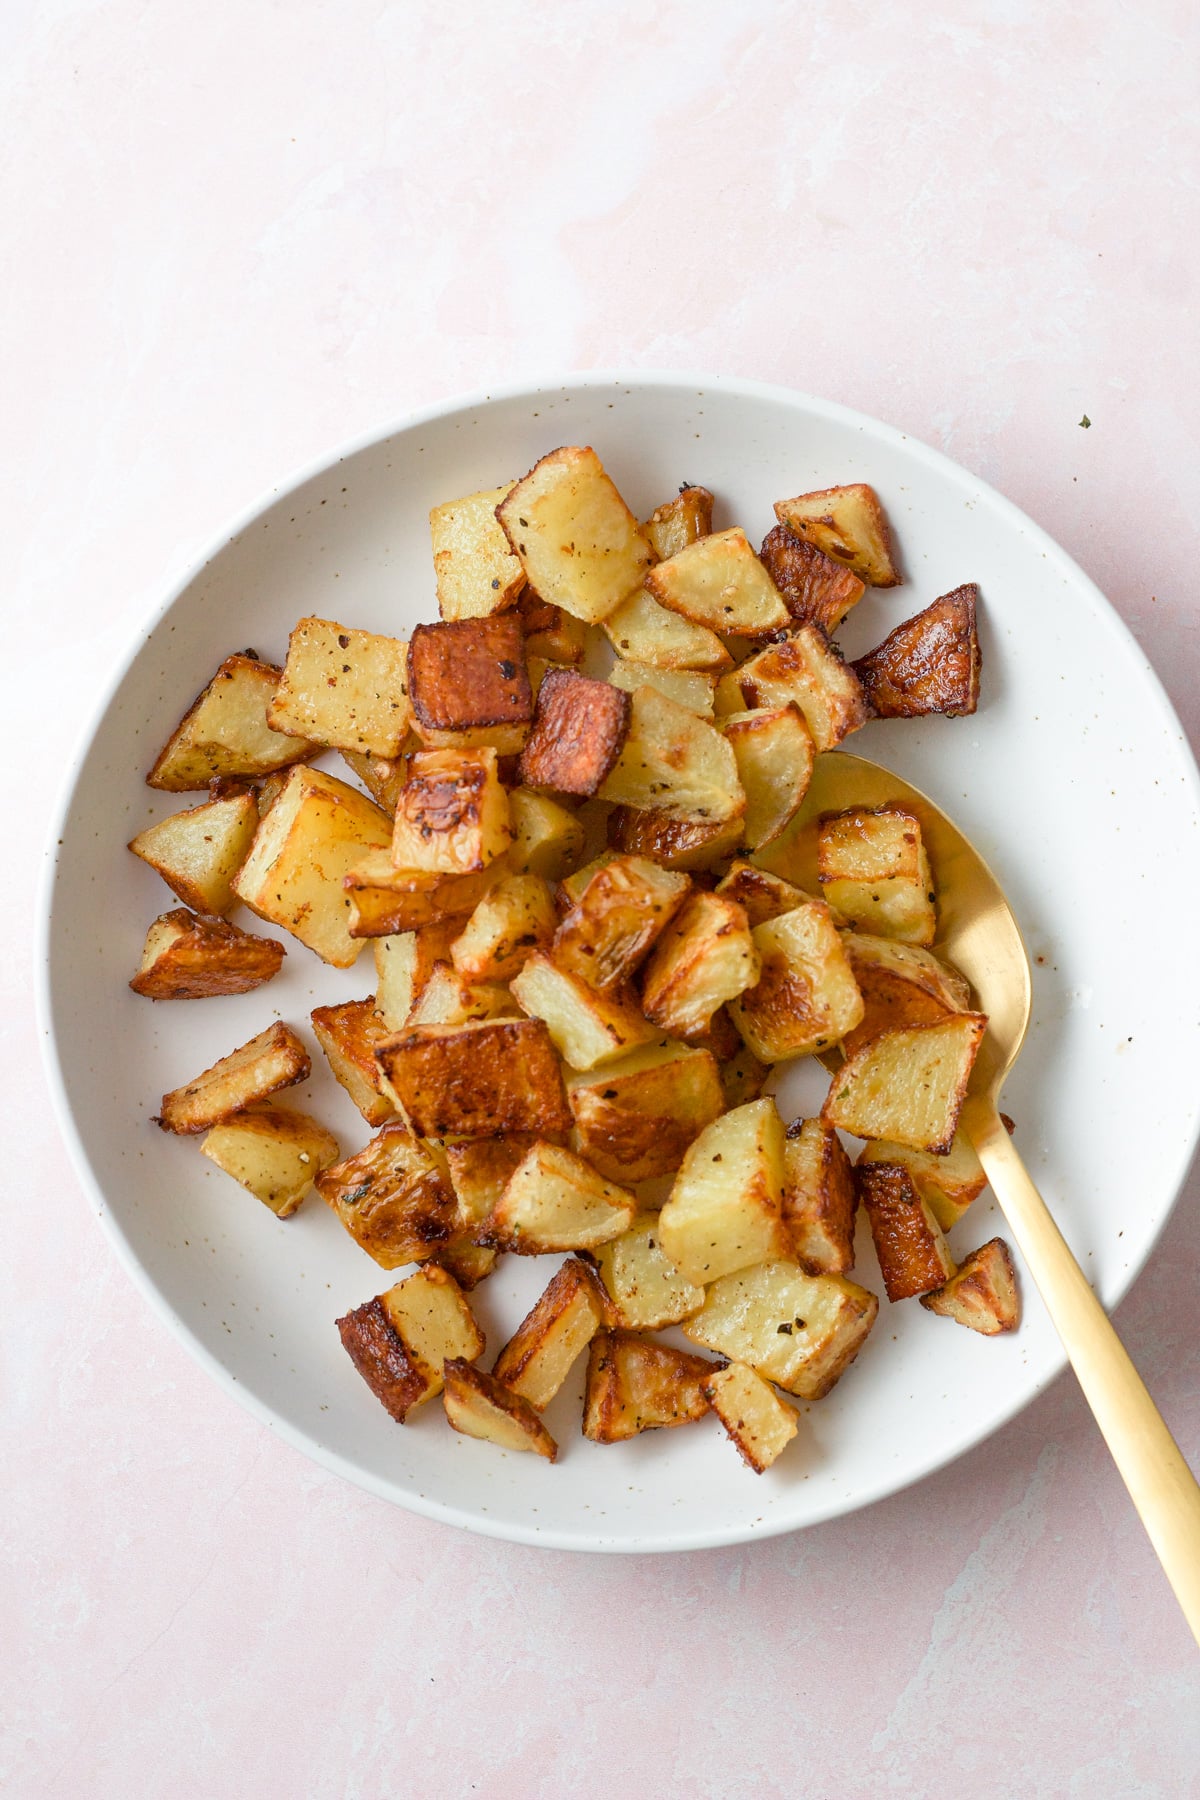 Roasted potatoes in serving dish.